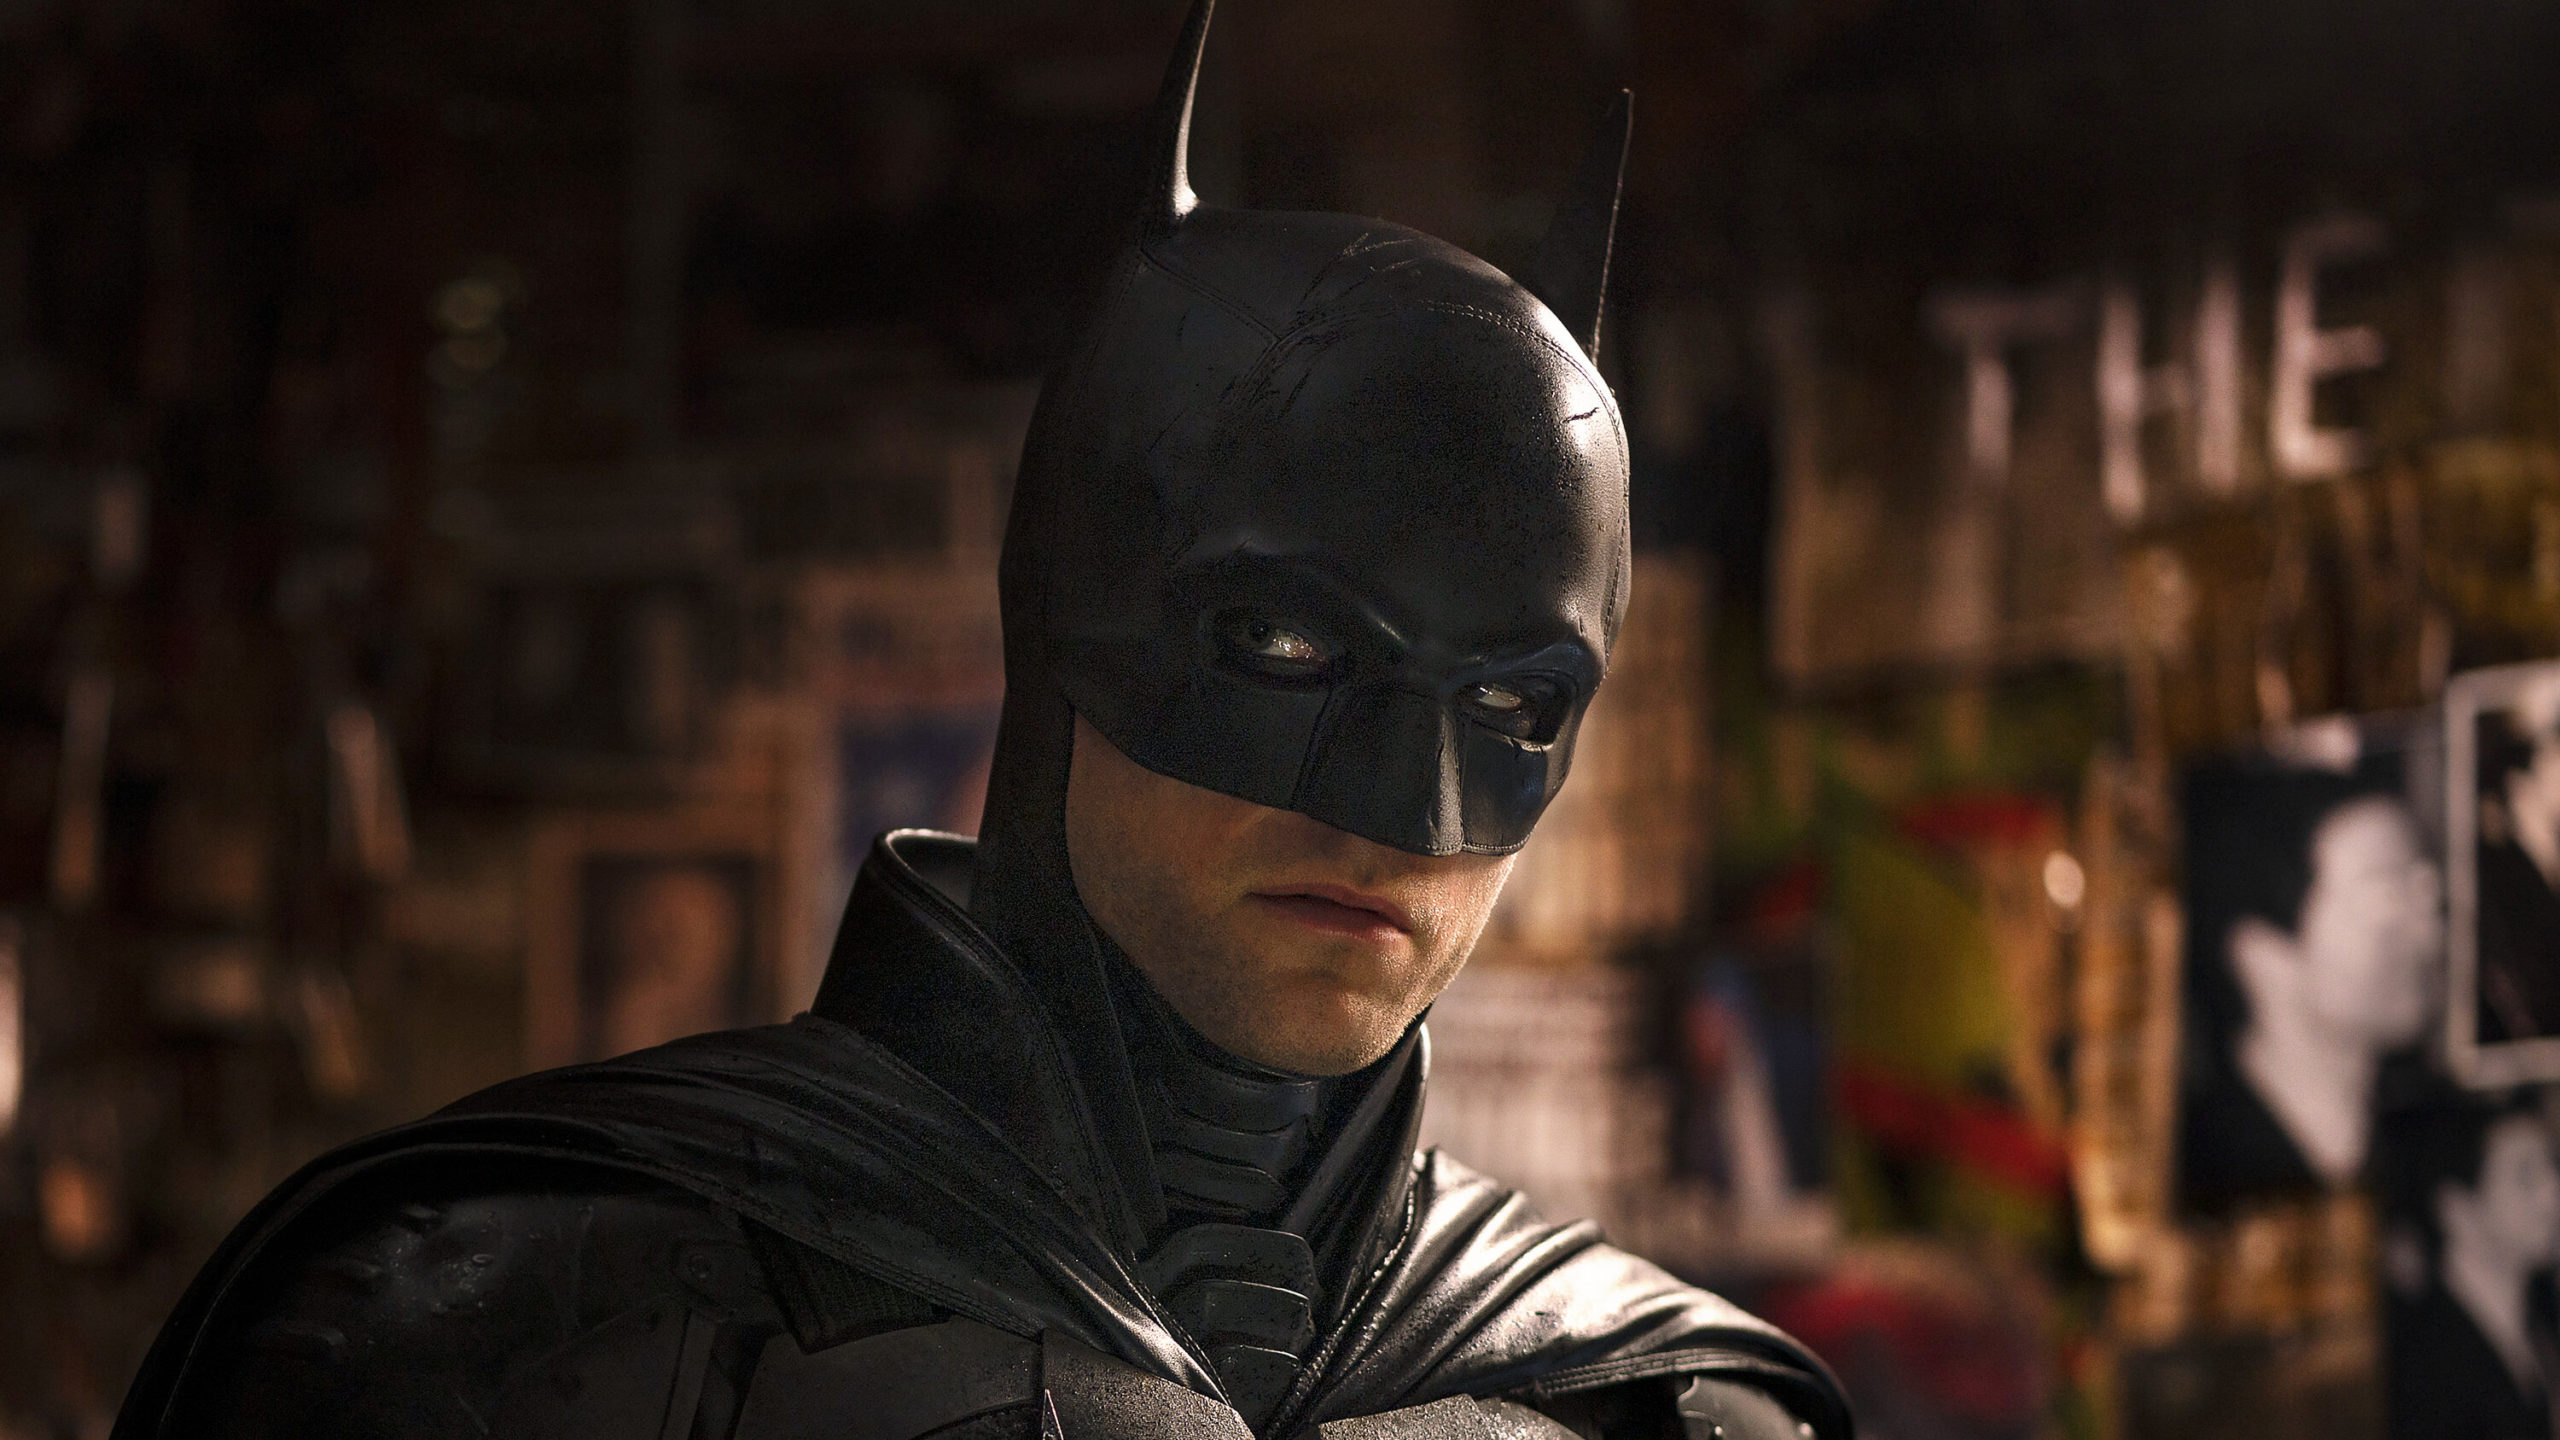 The Batman 2 Announced As In Development At CinemaCon